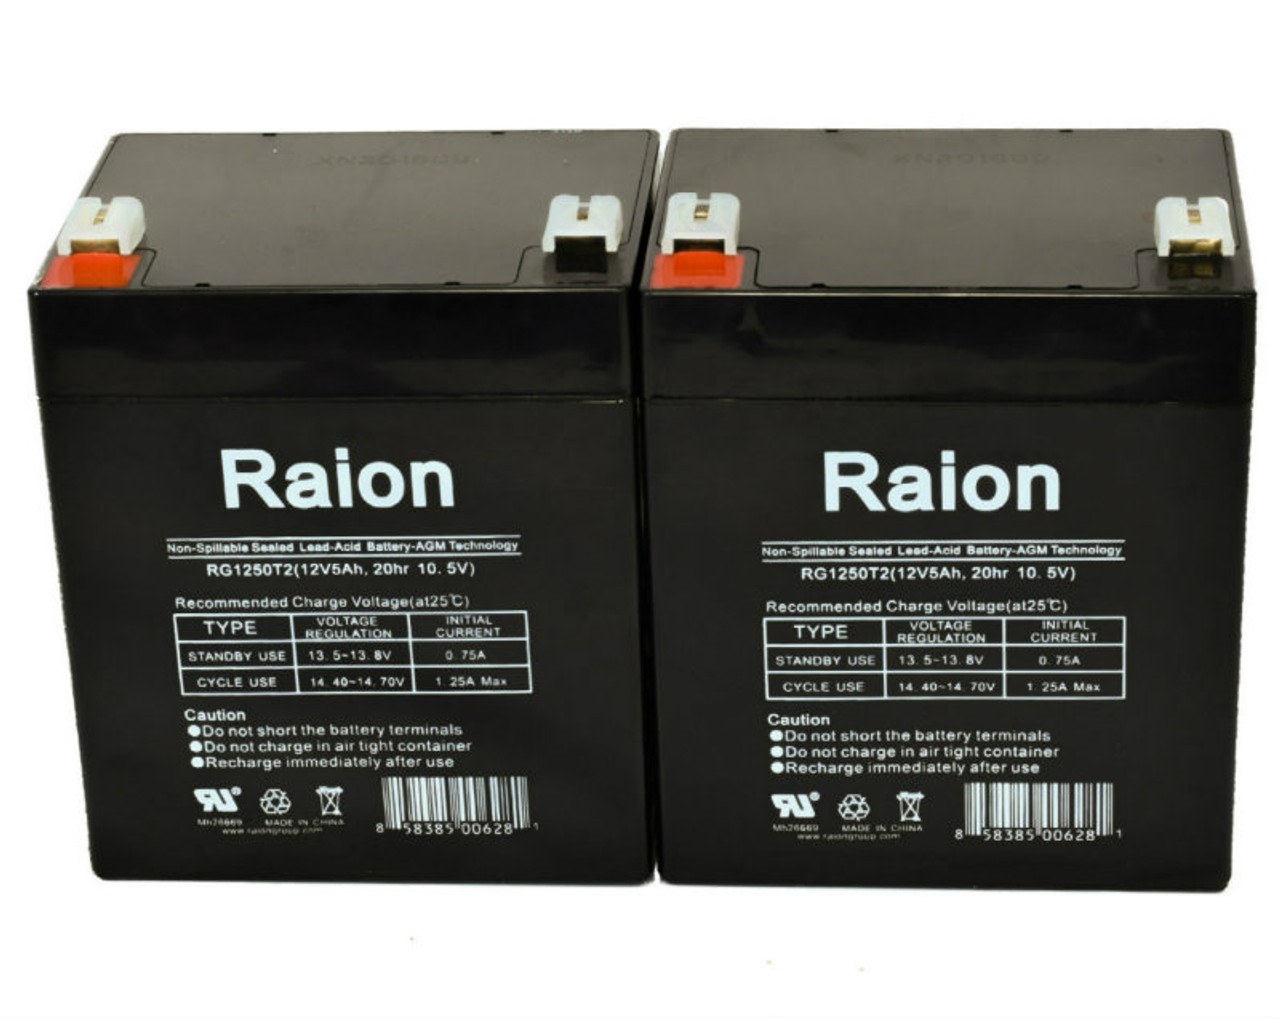 Raion Power 12V 5Ah RG1250T2 Replacement Lead Acid Battery for Duracell DURA12-5F2 - 2 Pack